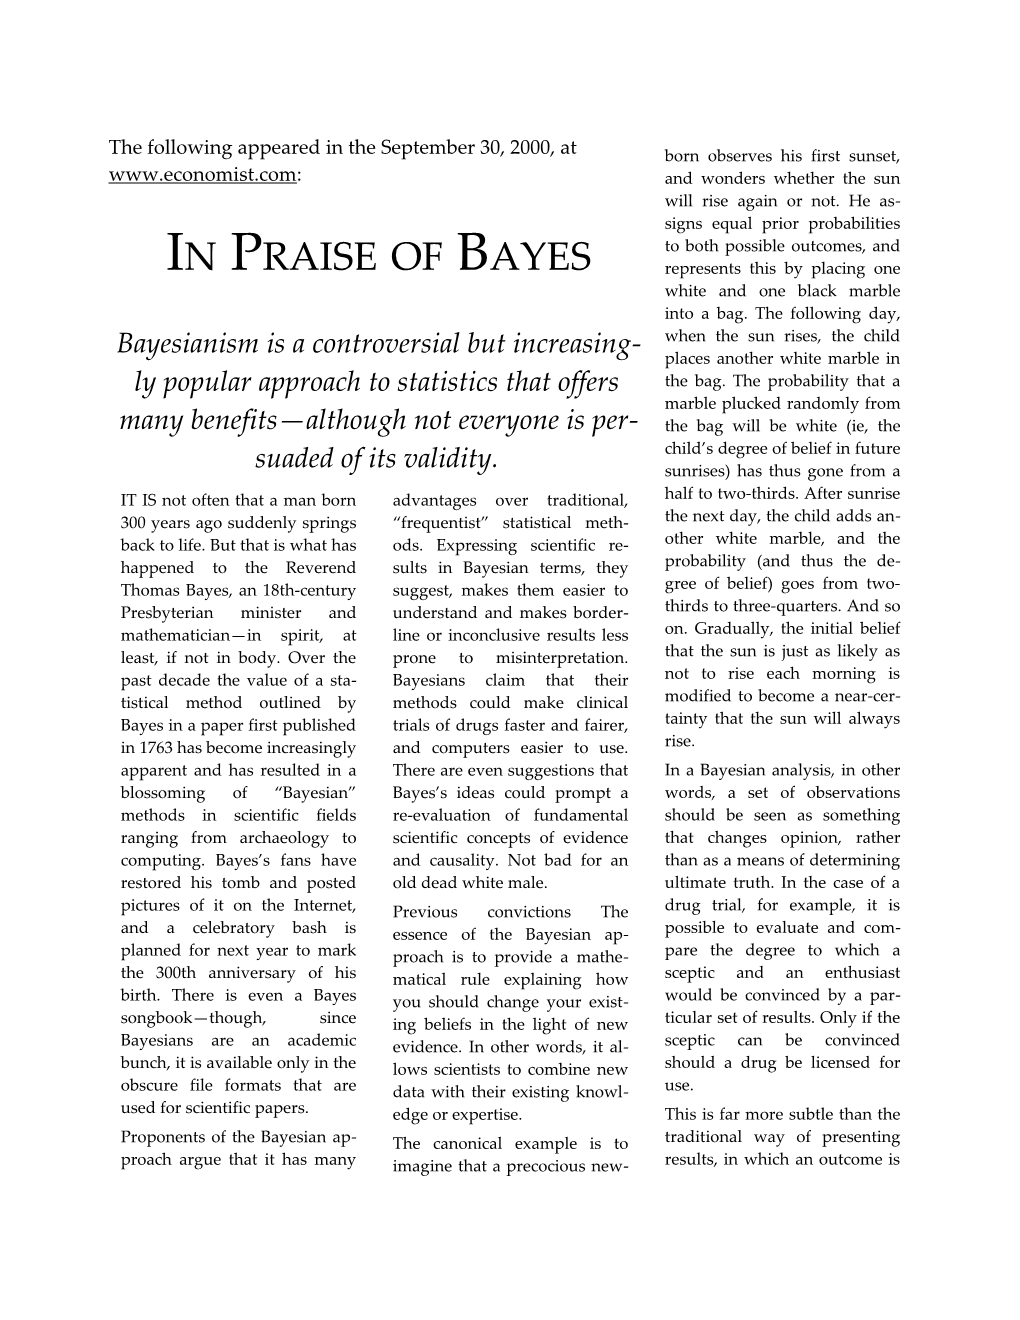 Proponents of the Bayesian Approach Argue That It Has Many Advantages Over Traditional